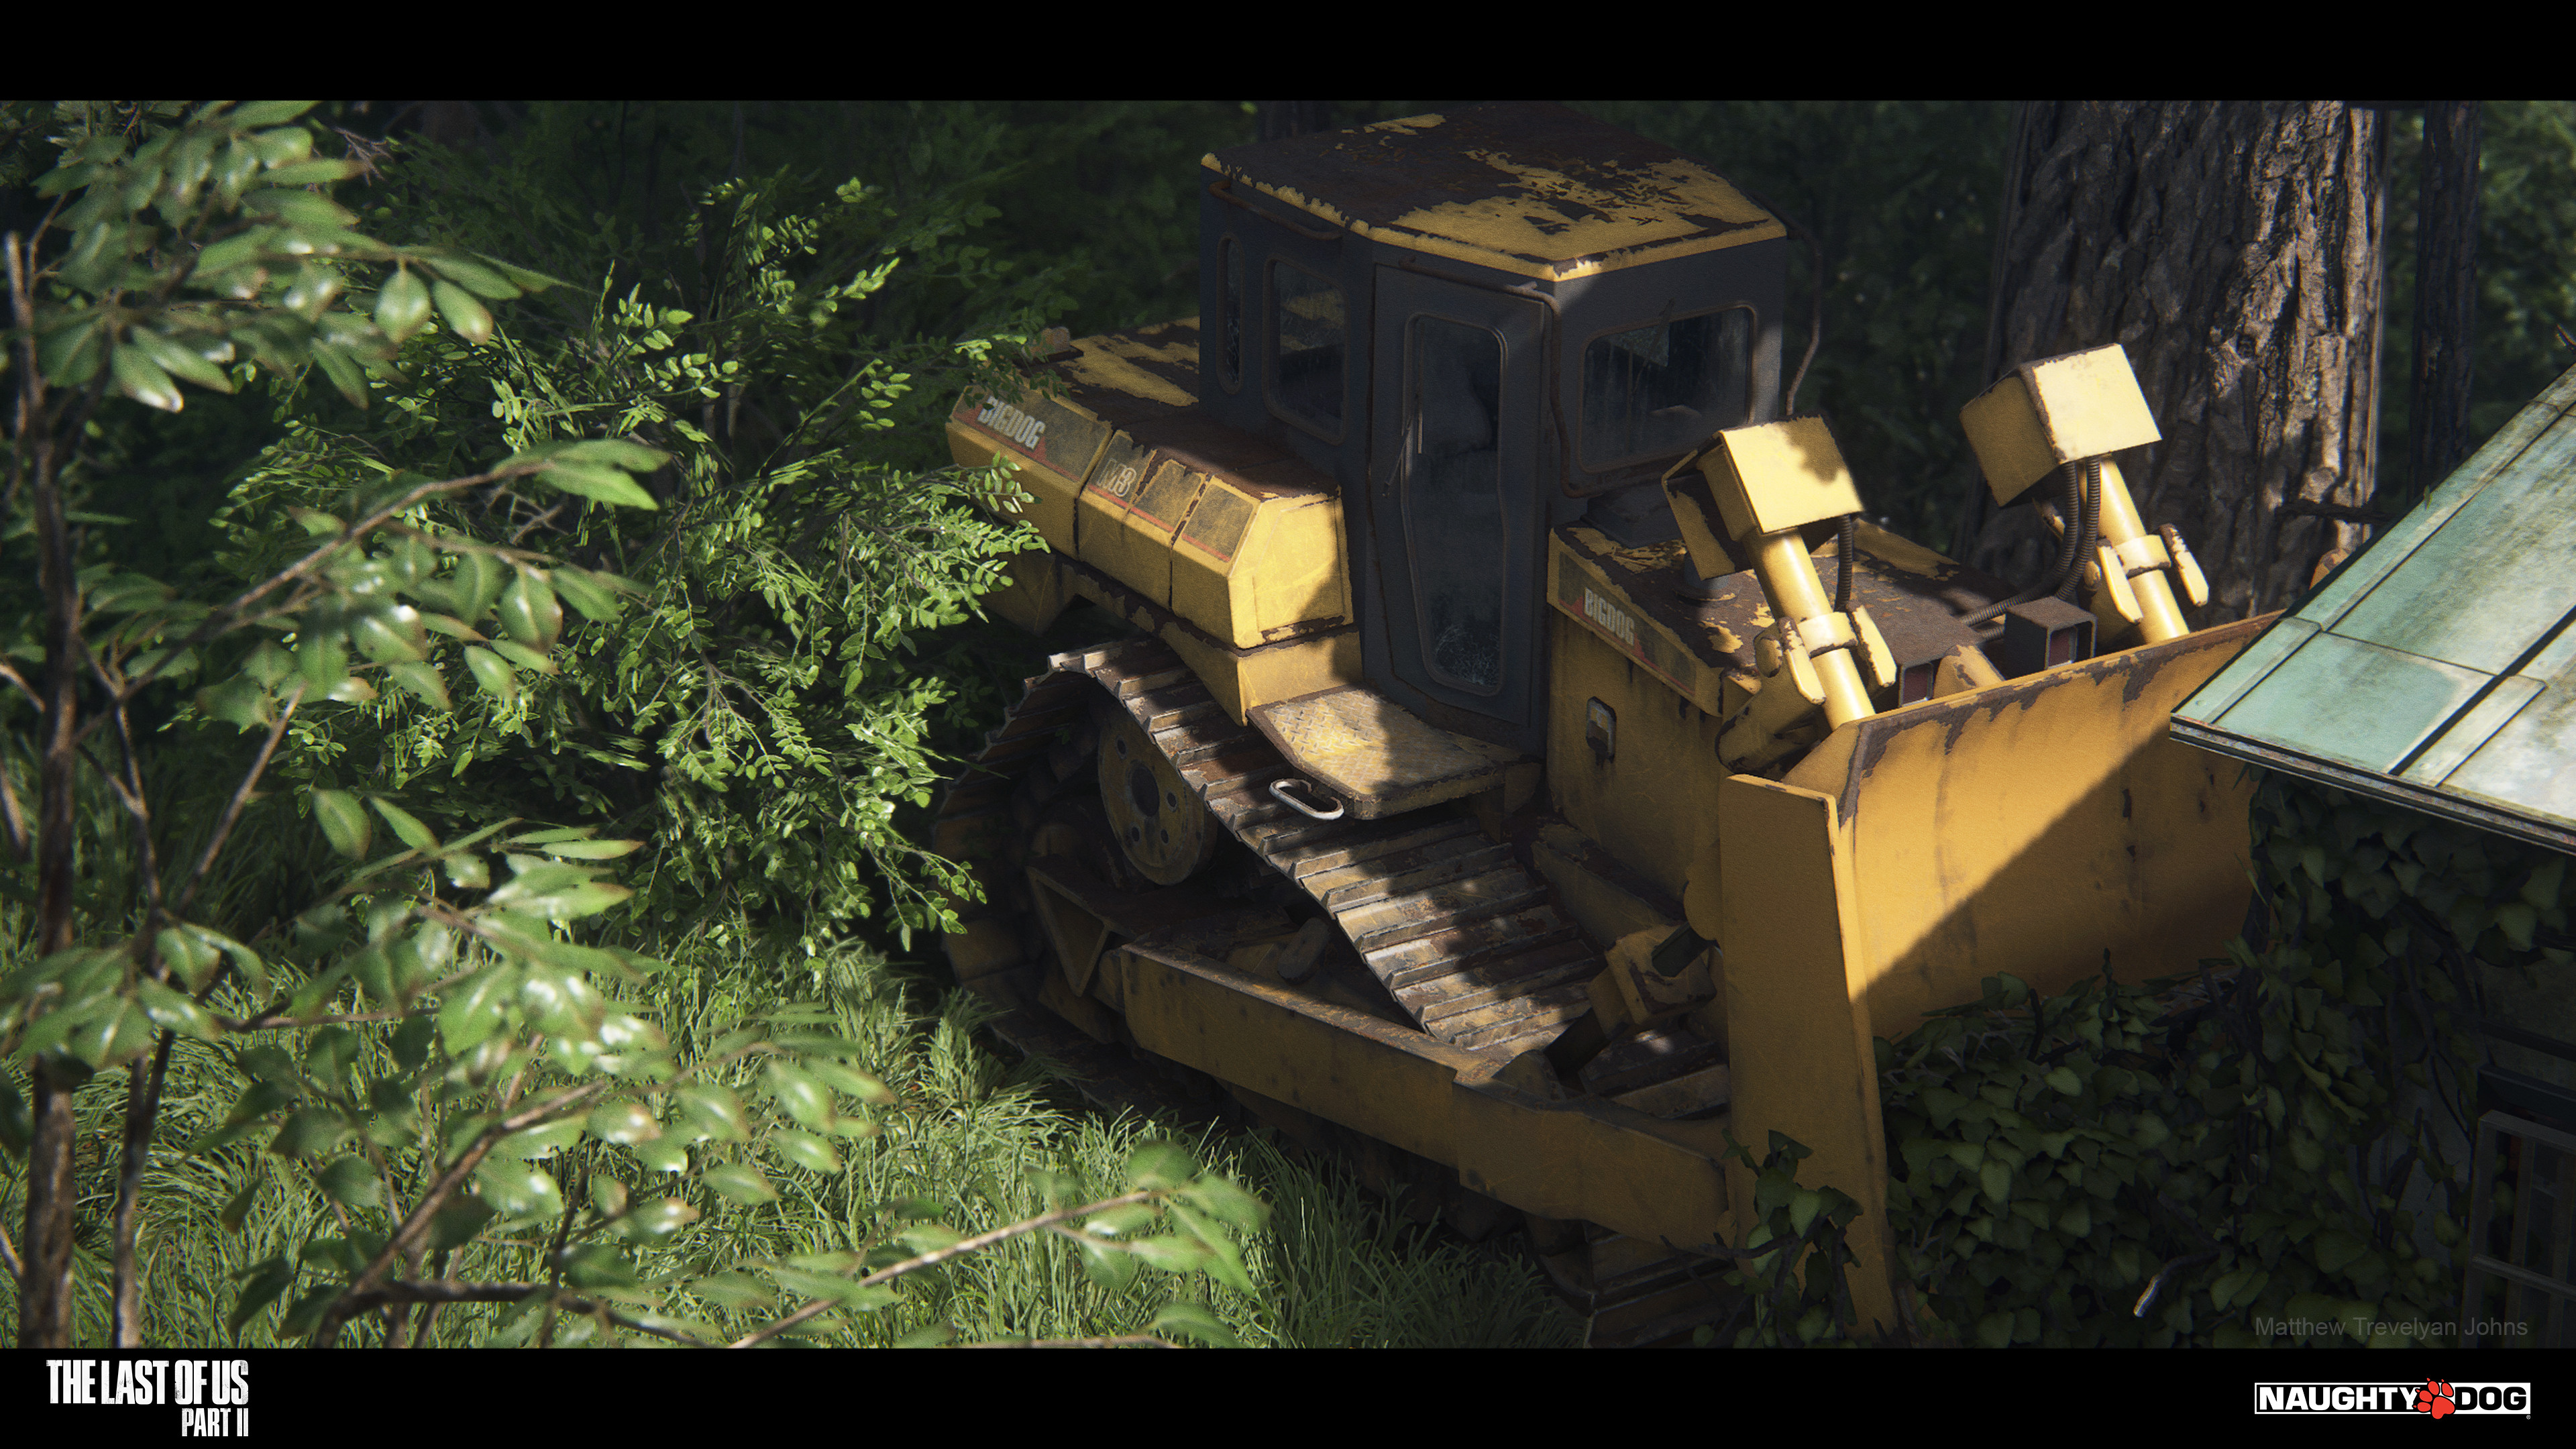 The 'BigDog' was a really fun vehicle to make, I built this from the ground up and it served as the test -bed for the 'hero' vehicle pipeline. 